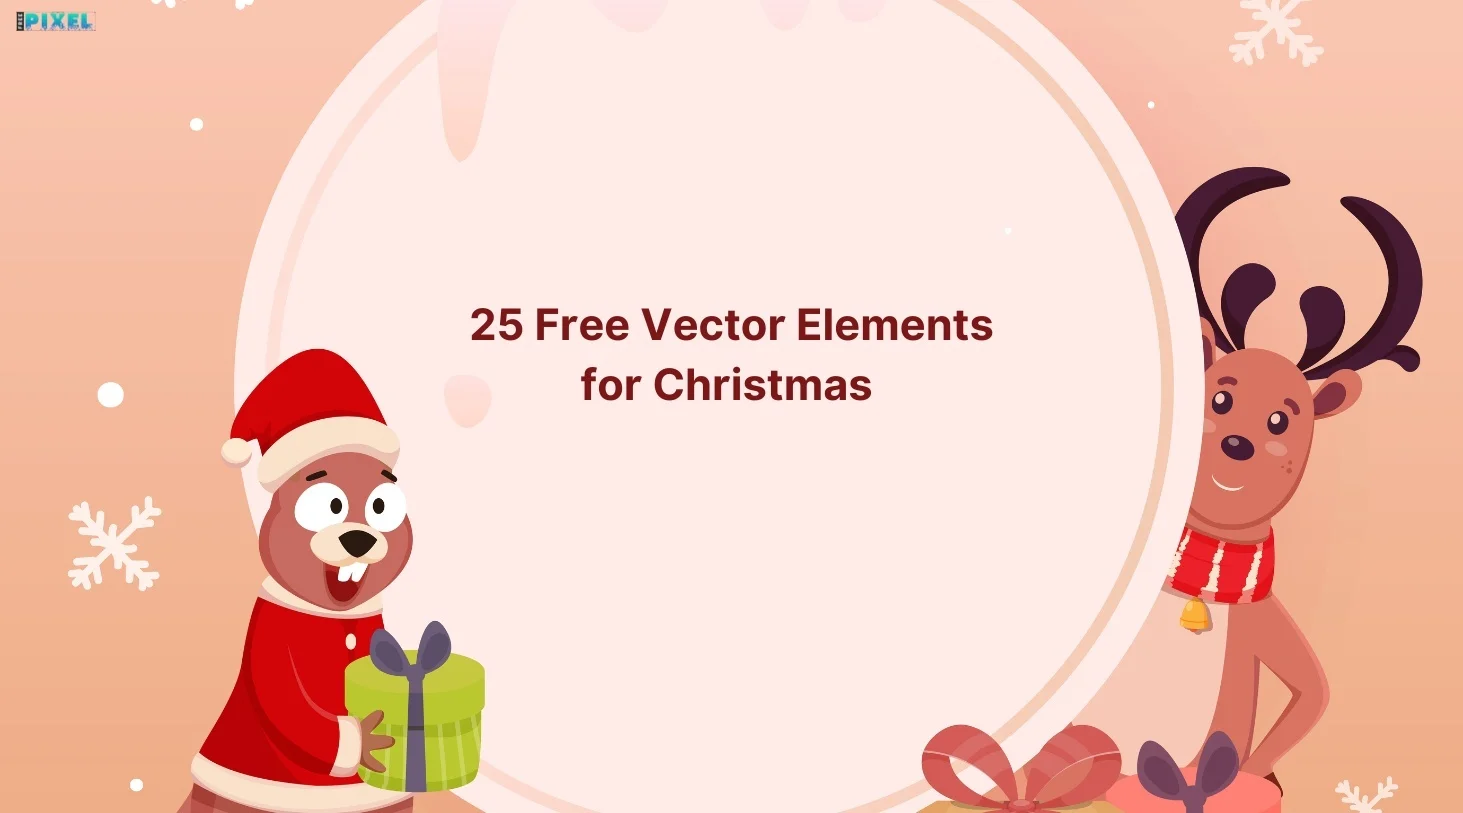 25 Free Vector Elements for Christmas